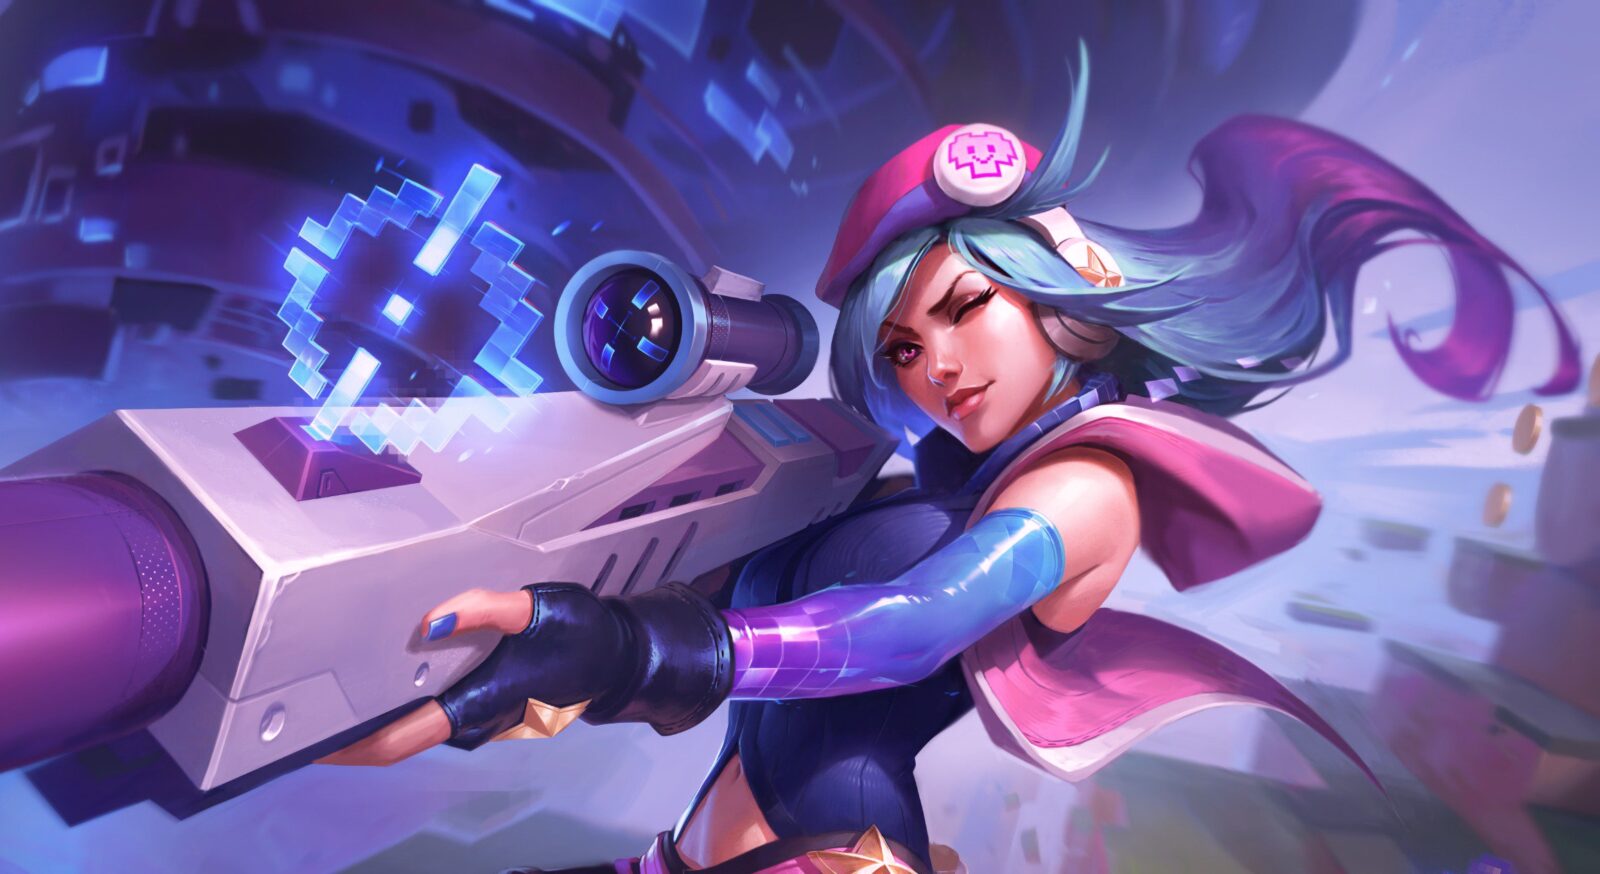 Arcade Caitlyn - Sniper cop - this is how you can describe this skin for Ca...